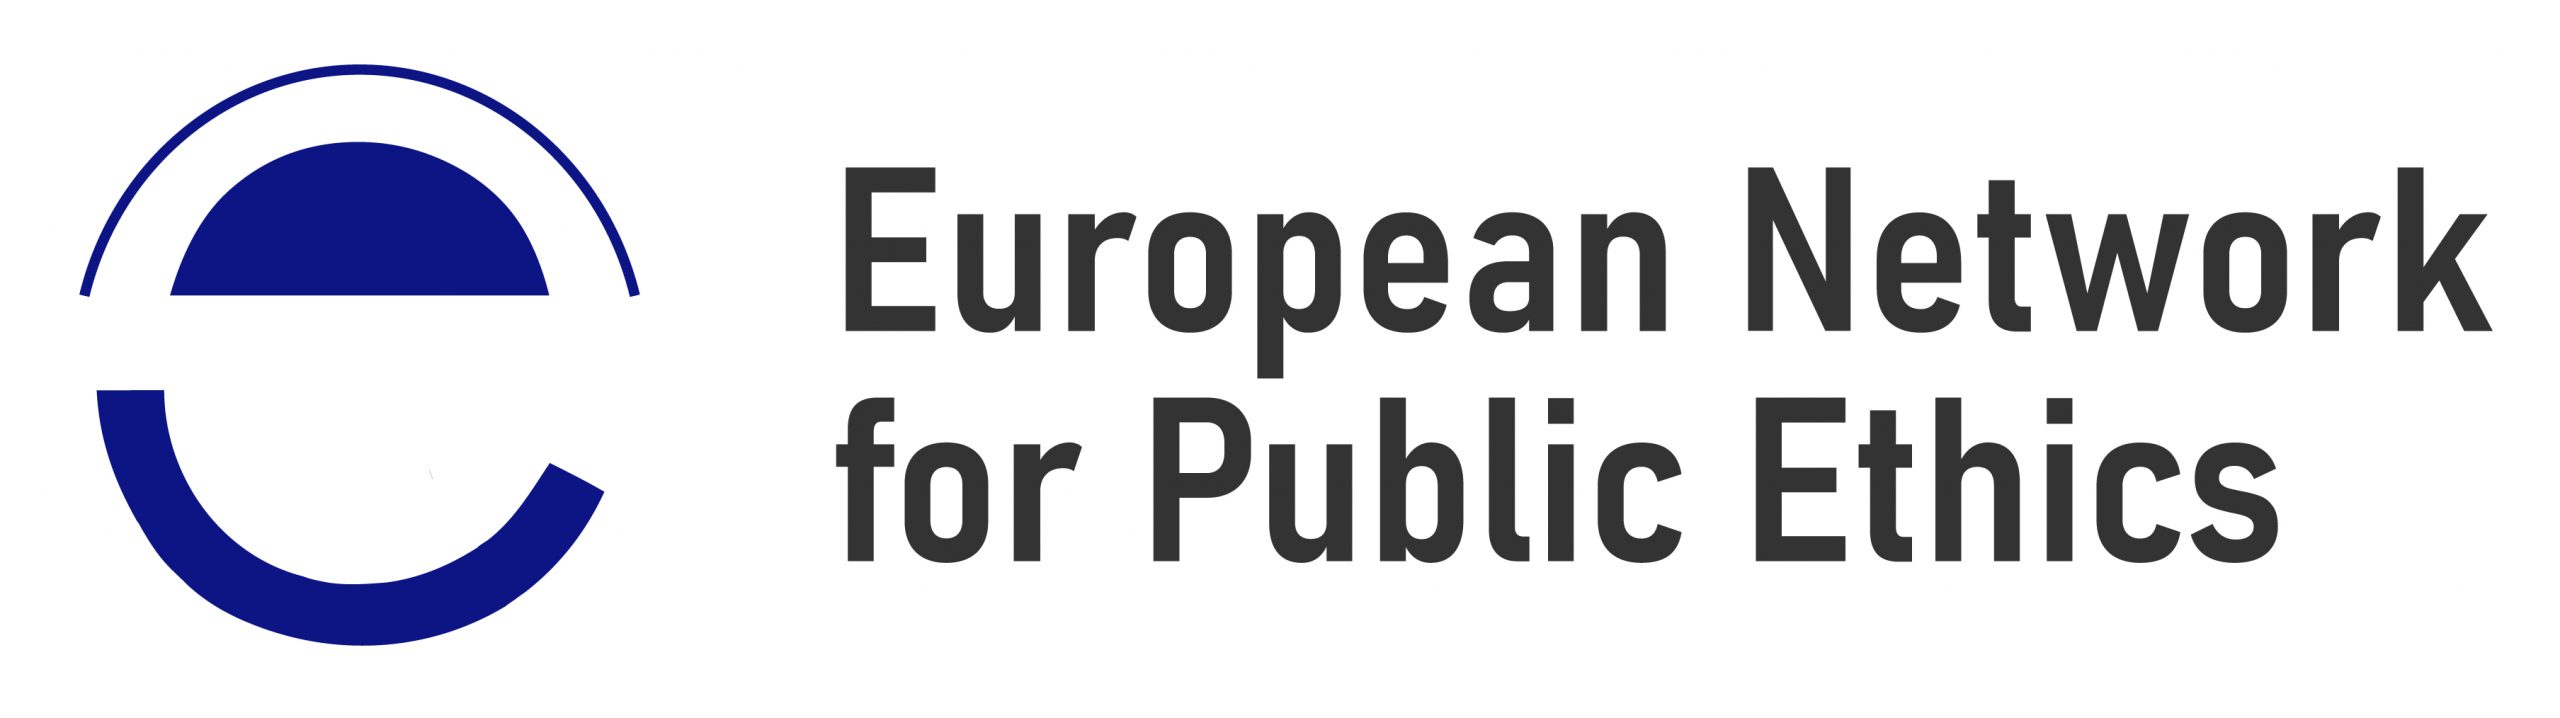 EU anti-corruption package: the European Network for Public Ethics speaks out